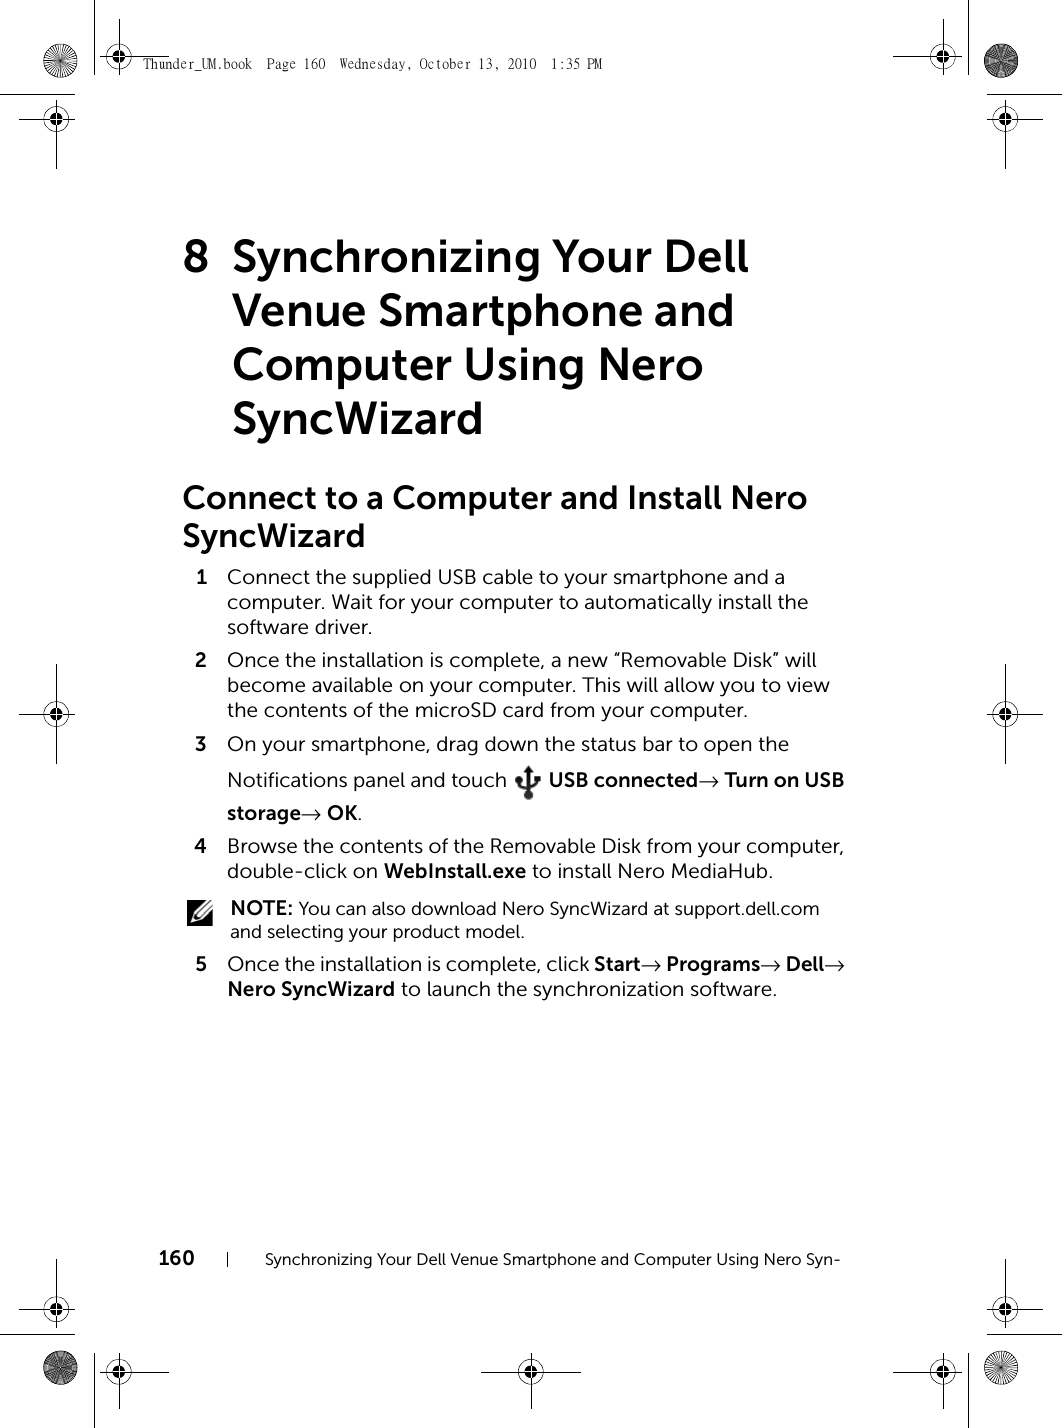 160 Synchronizing Your Dell Venue Smartphone and Computer Using Nero Syn-8 Synchronizing Your Dell Venue Smartphone and Computer Using Nero SyncWizardConnect to a Computer and Install Nero SyncWizard1Connect the supplied USB cable to your smartphone and a computer. Wait for your computer to automatically install the software driver.2Once the installation is complete, a new “Removable Disk” will become available on your computer. This will allow you to view the contents of the microSD card from your computer.3On your smartphone, drag down the status bar to open the Notifications panel and touch   USB connected→ Turn on USB storage→ OK.4Browse the contents of the Removable Disk from your computer, double-click on WebInstall.exe to install Nero MediaHub. NOTE: You can also download Nero SyncWizard at support.dell.com and selecting your product model.5Once the installation is complete, click Start→ Programs→ Dell→ Nero SyncWizard to launch the synchronization software.Thunder_UM.book  Page 160  Wednesday, October 13, 2010  1:35 PM